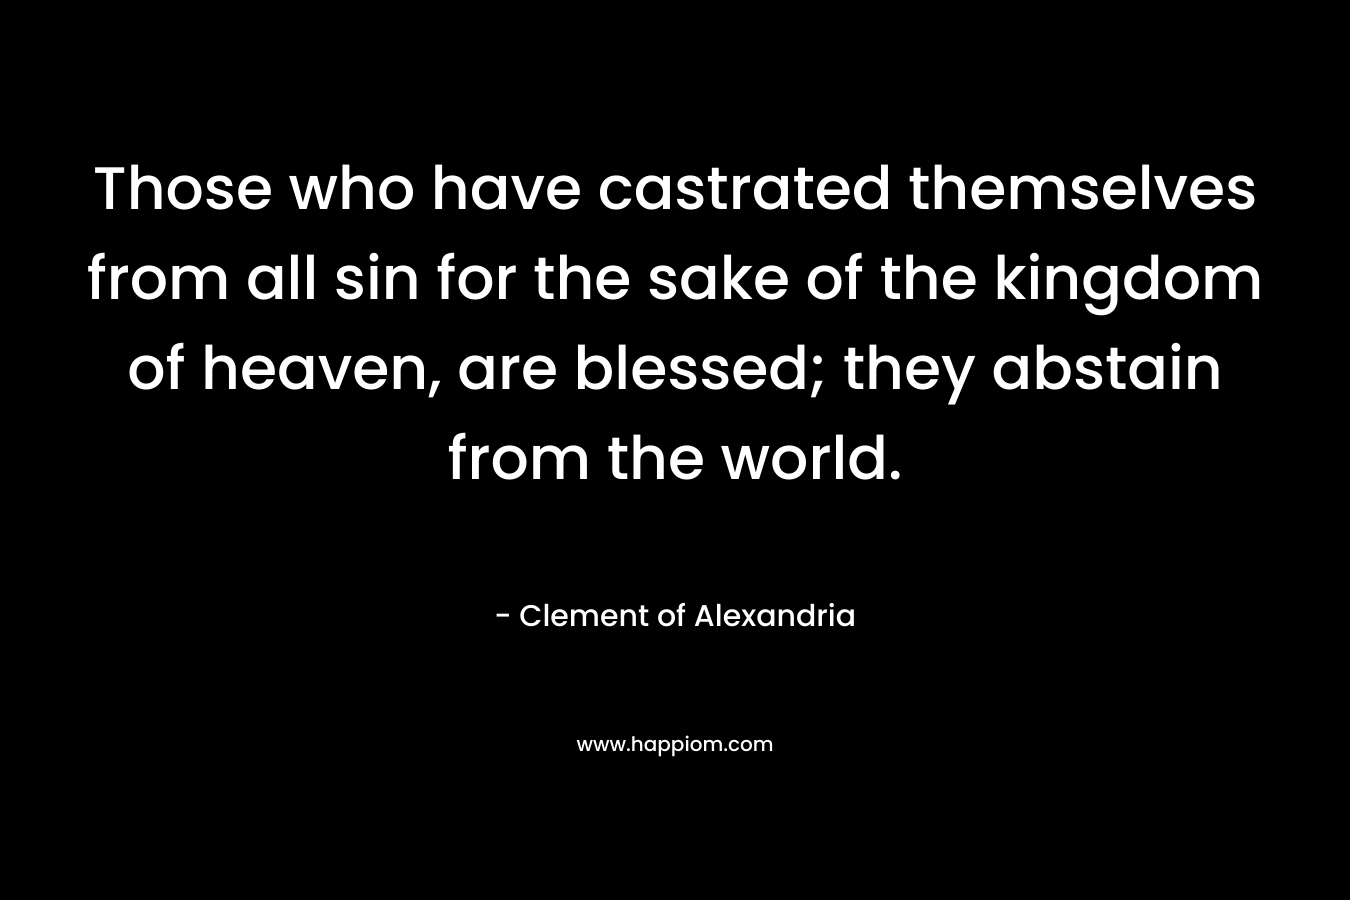 Those who have castrated themselves from all sin for the sake of the kingdom of heaven, are blessed; they abstain from the world.